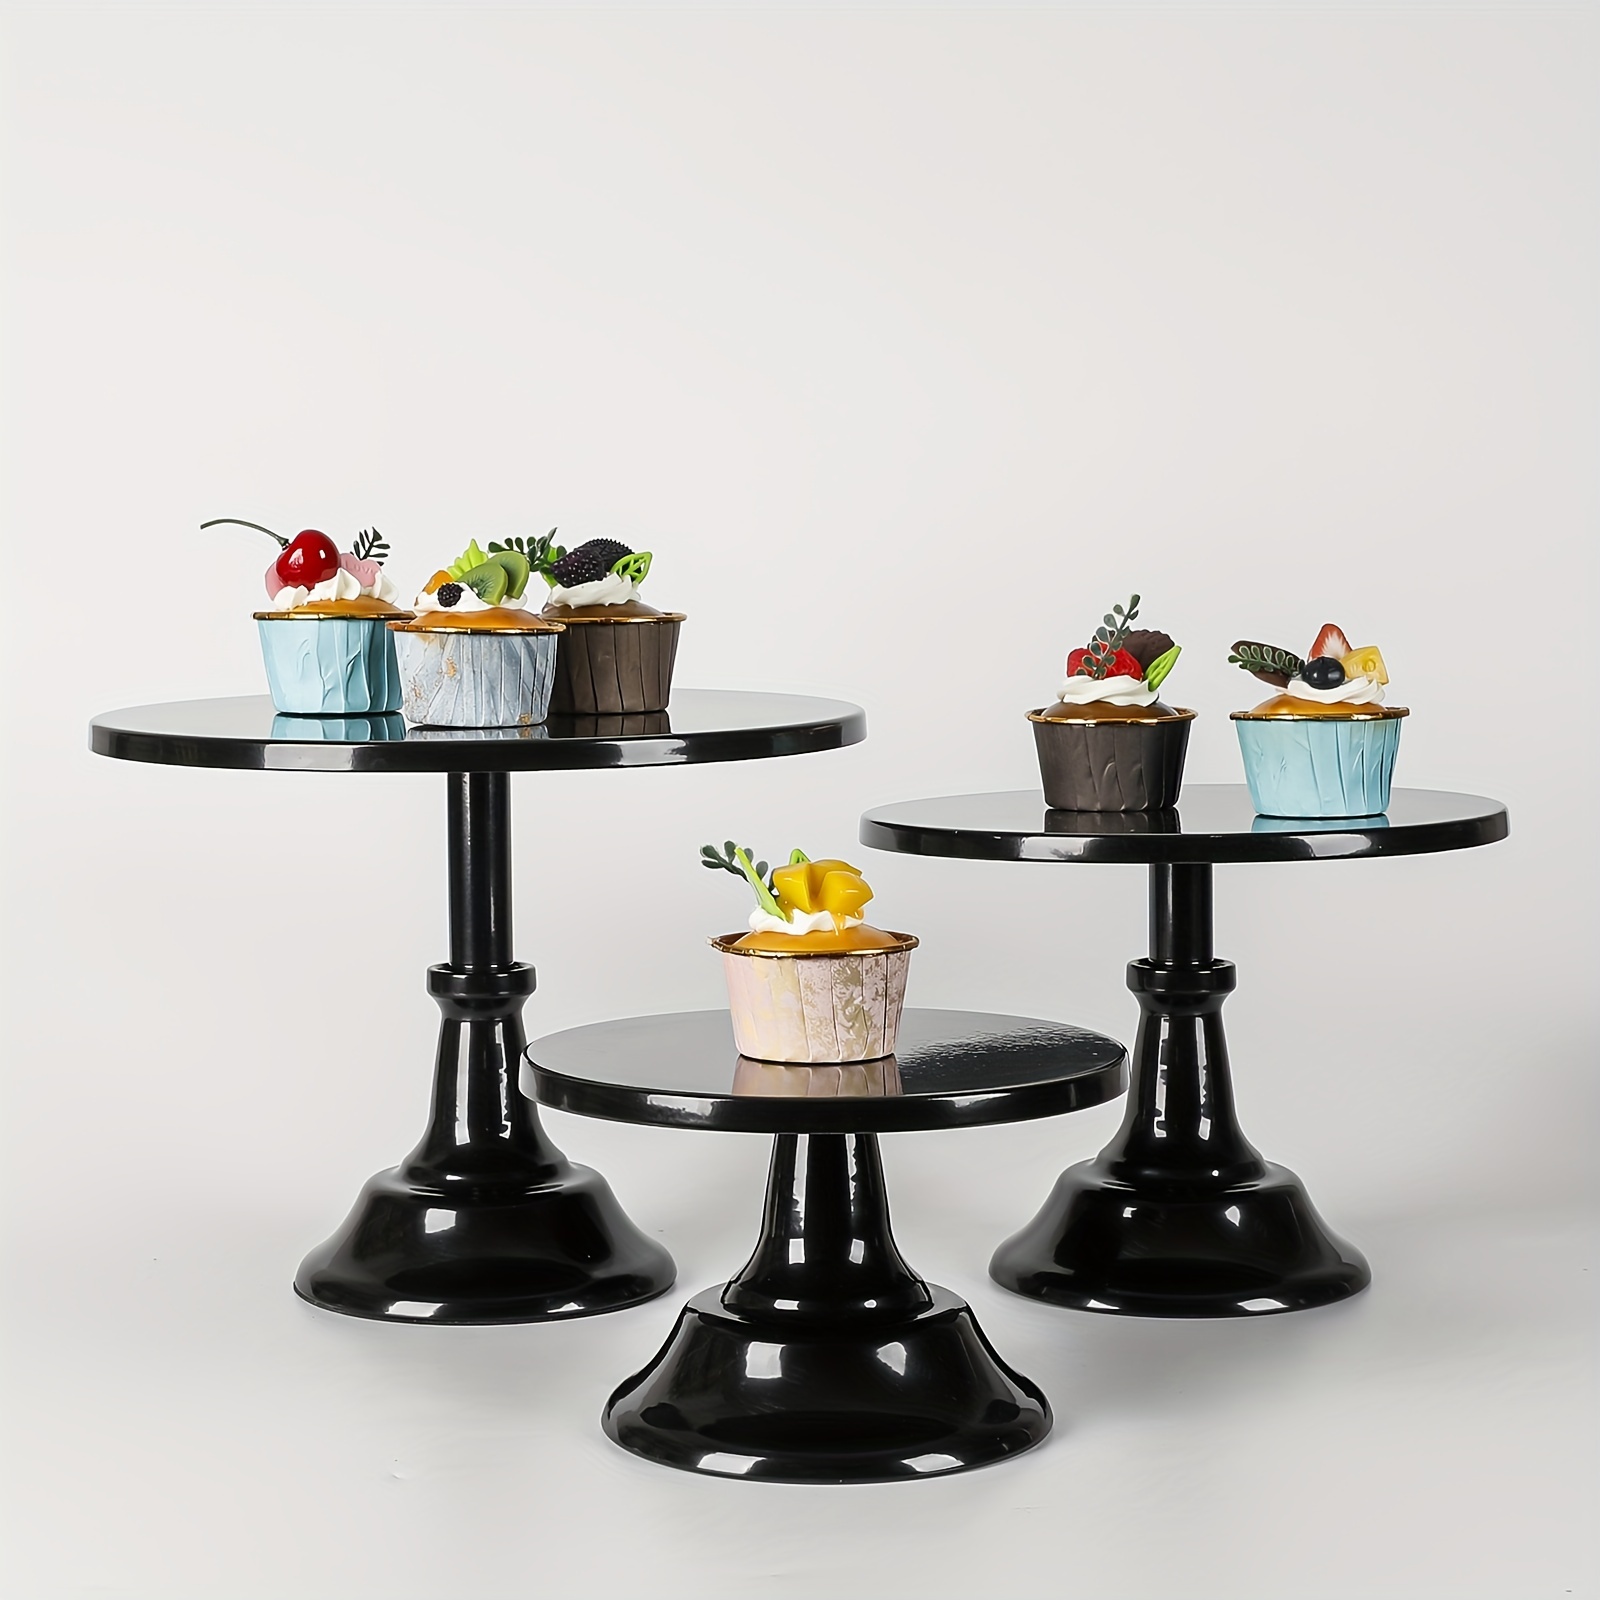 

3pcs Cake Stand, Round Cupcake Stand 8/10/12inch Dessert Display Stand Cupcake Holder Pastry Serving Plate For Baby Shower Wedding Birthday Party Celebration Home Decoration